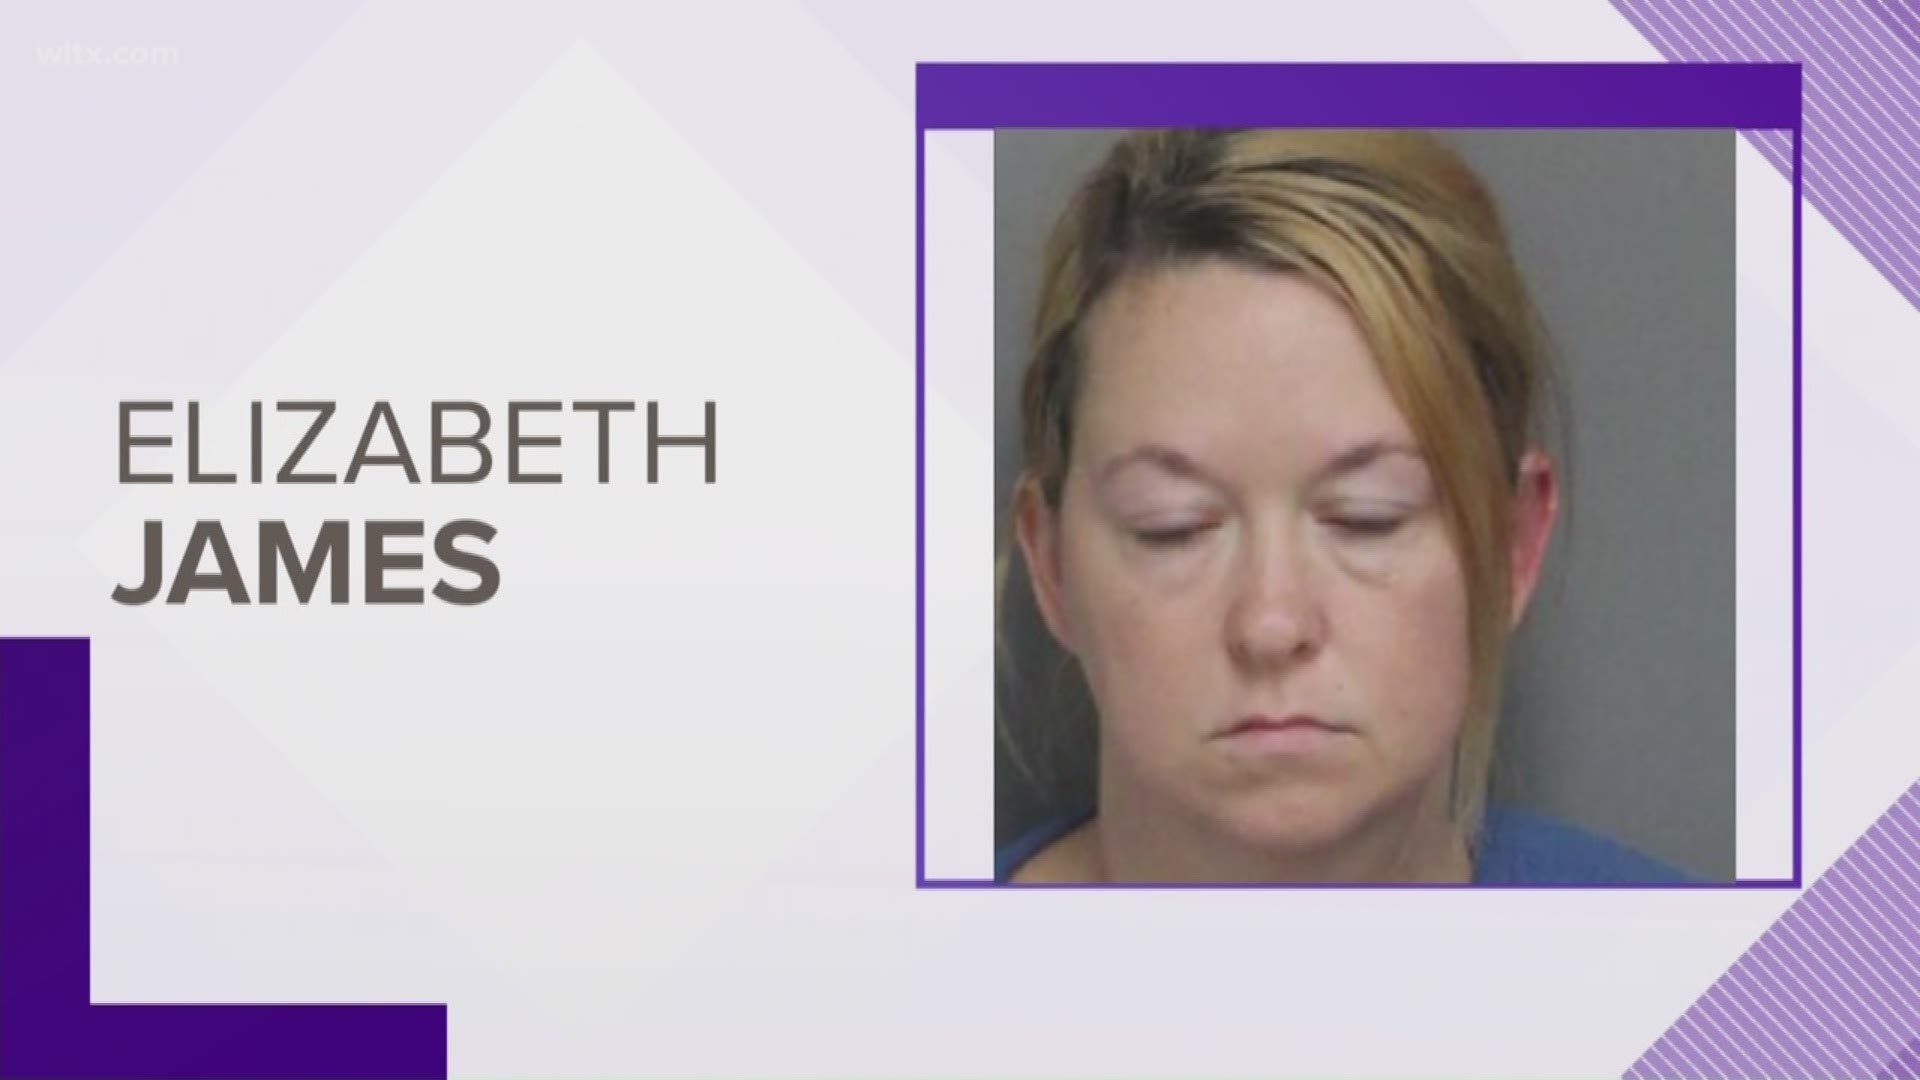 Elizabeth Lena James, 30, of Laurens, was charged with ill treatment of an animal, according to jail records and the Laurens County Sheriff's Office.